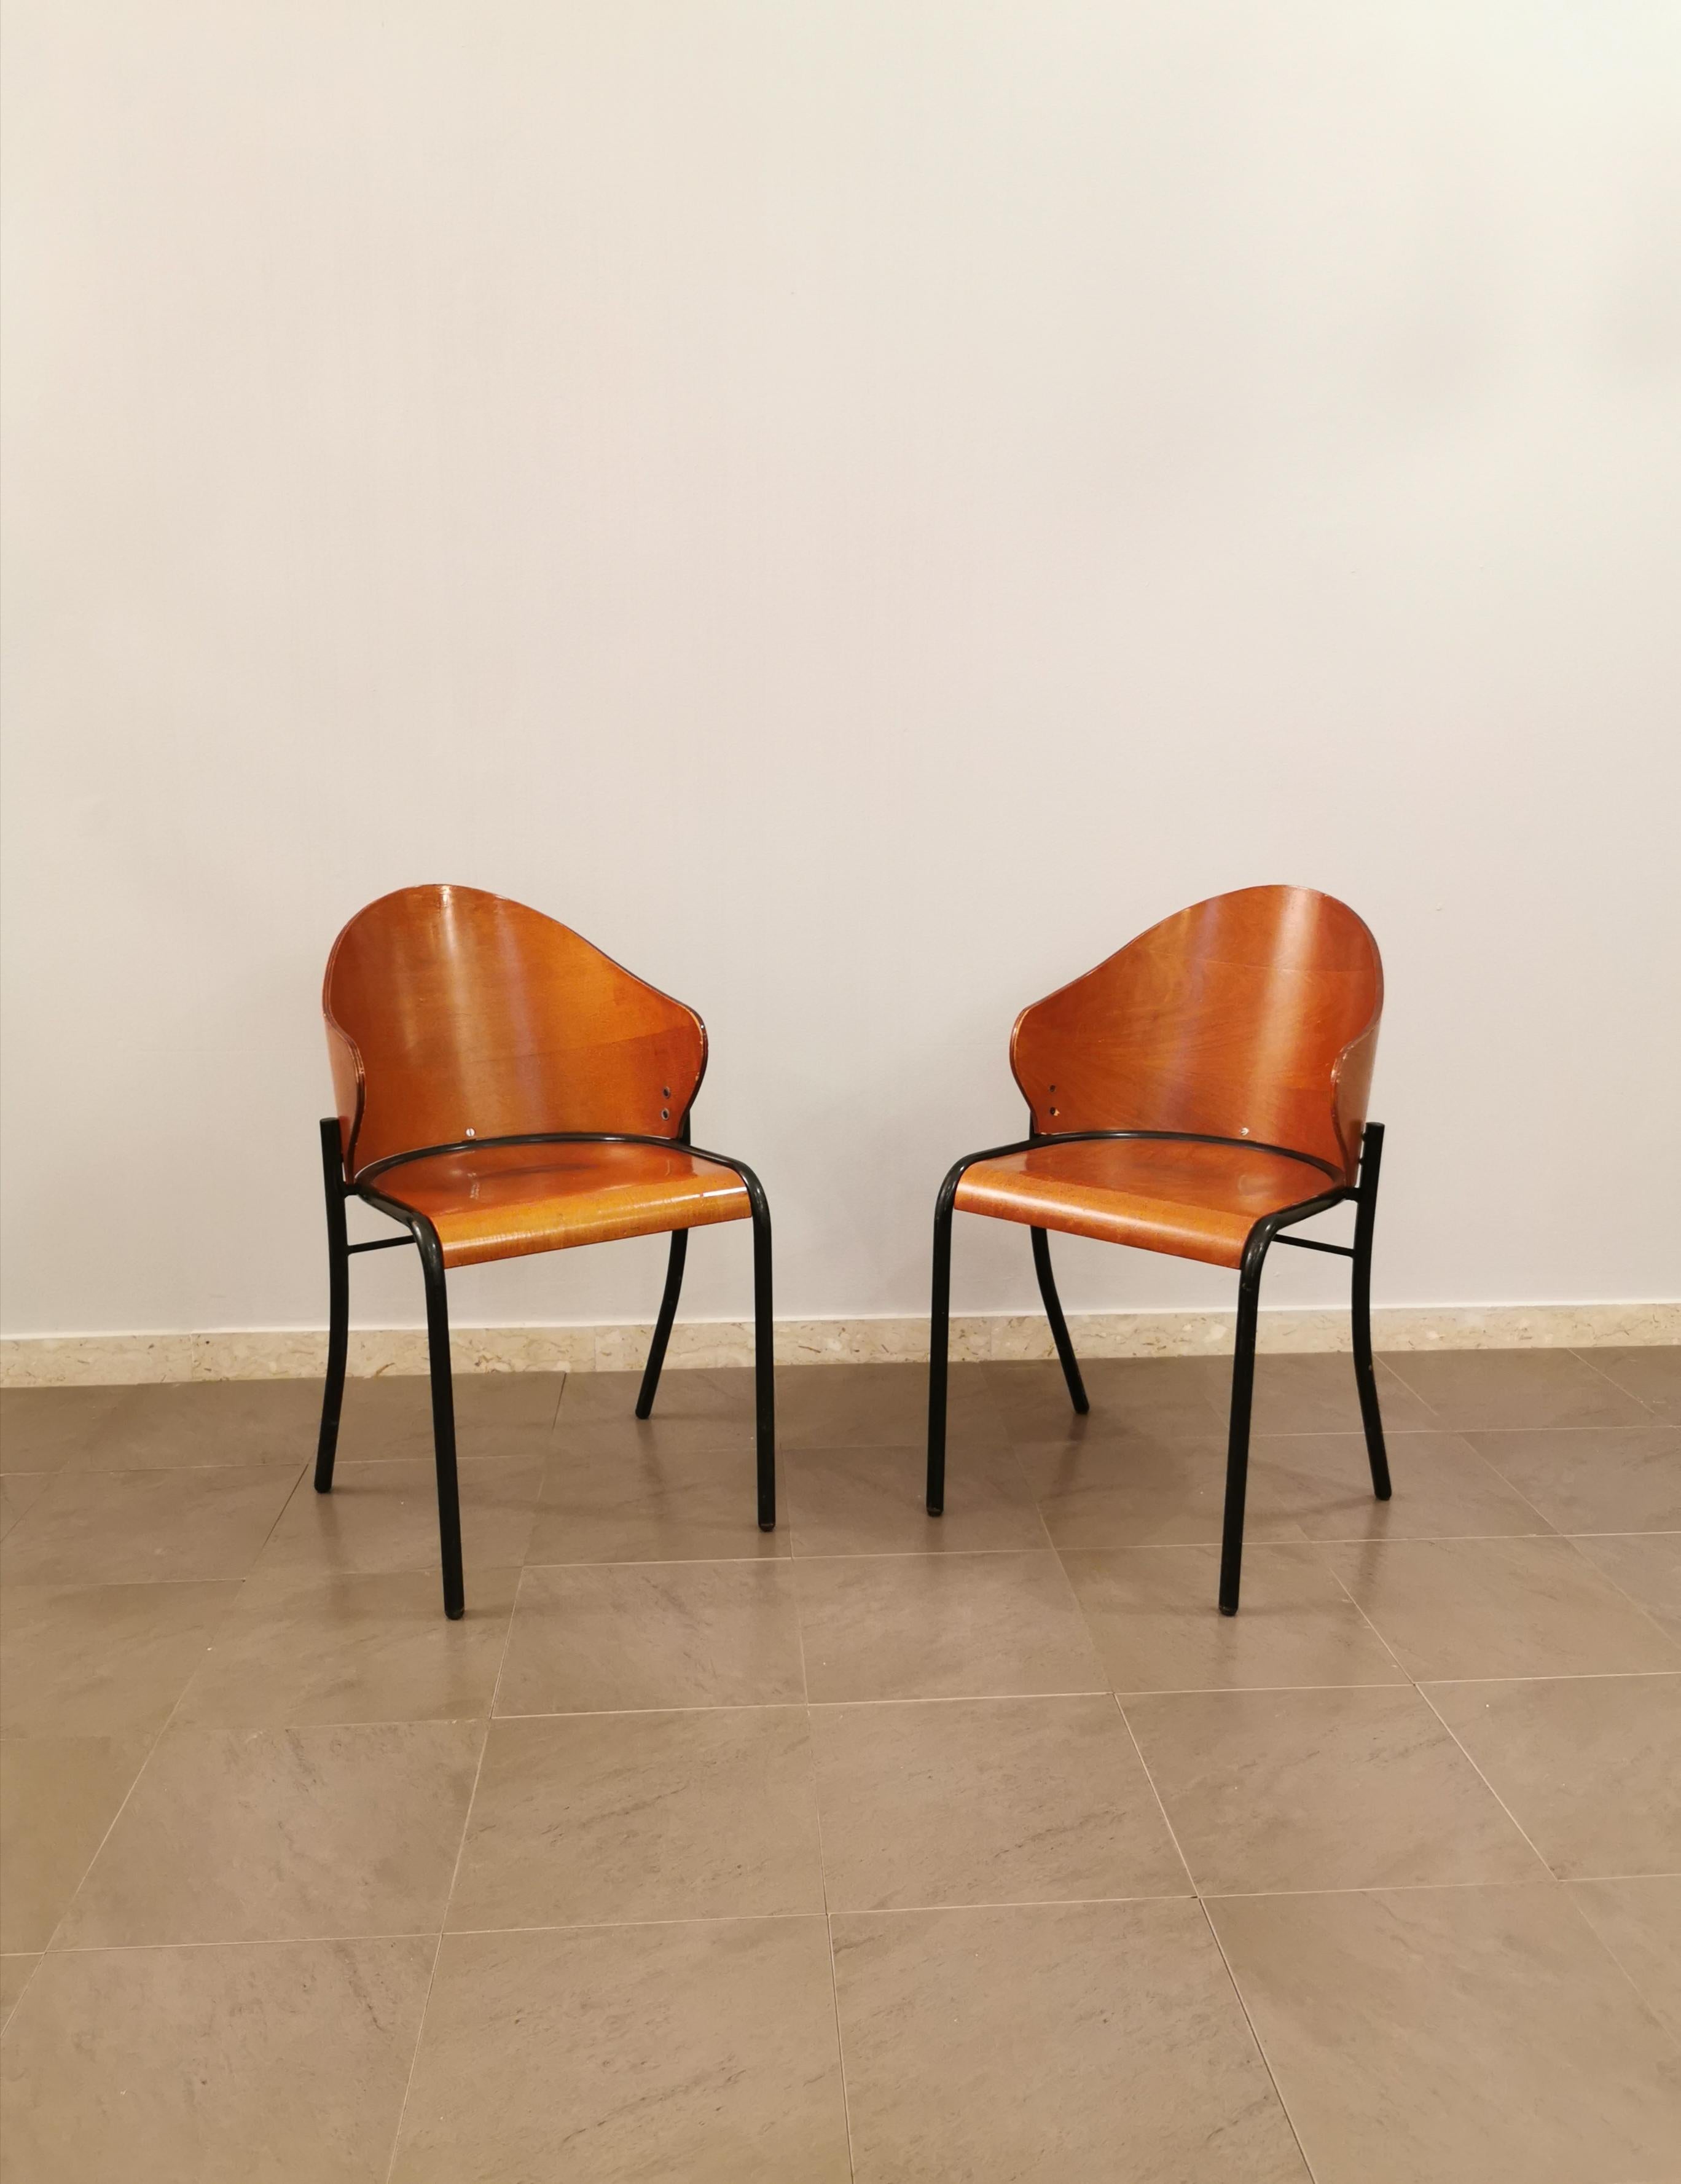 Mid-Century Modern Midcentury Dining Room Chairs Curved Wood Enameled Metal Italy 1960s Set of 2